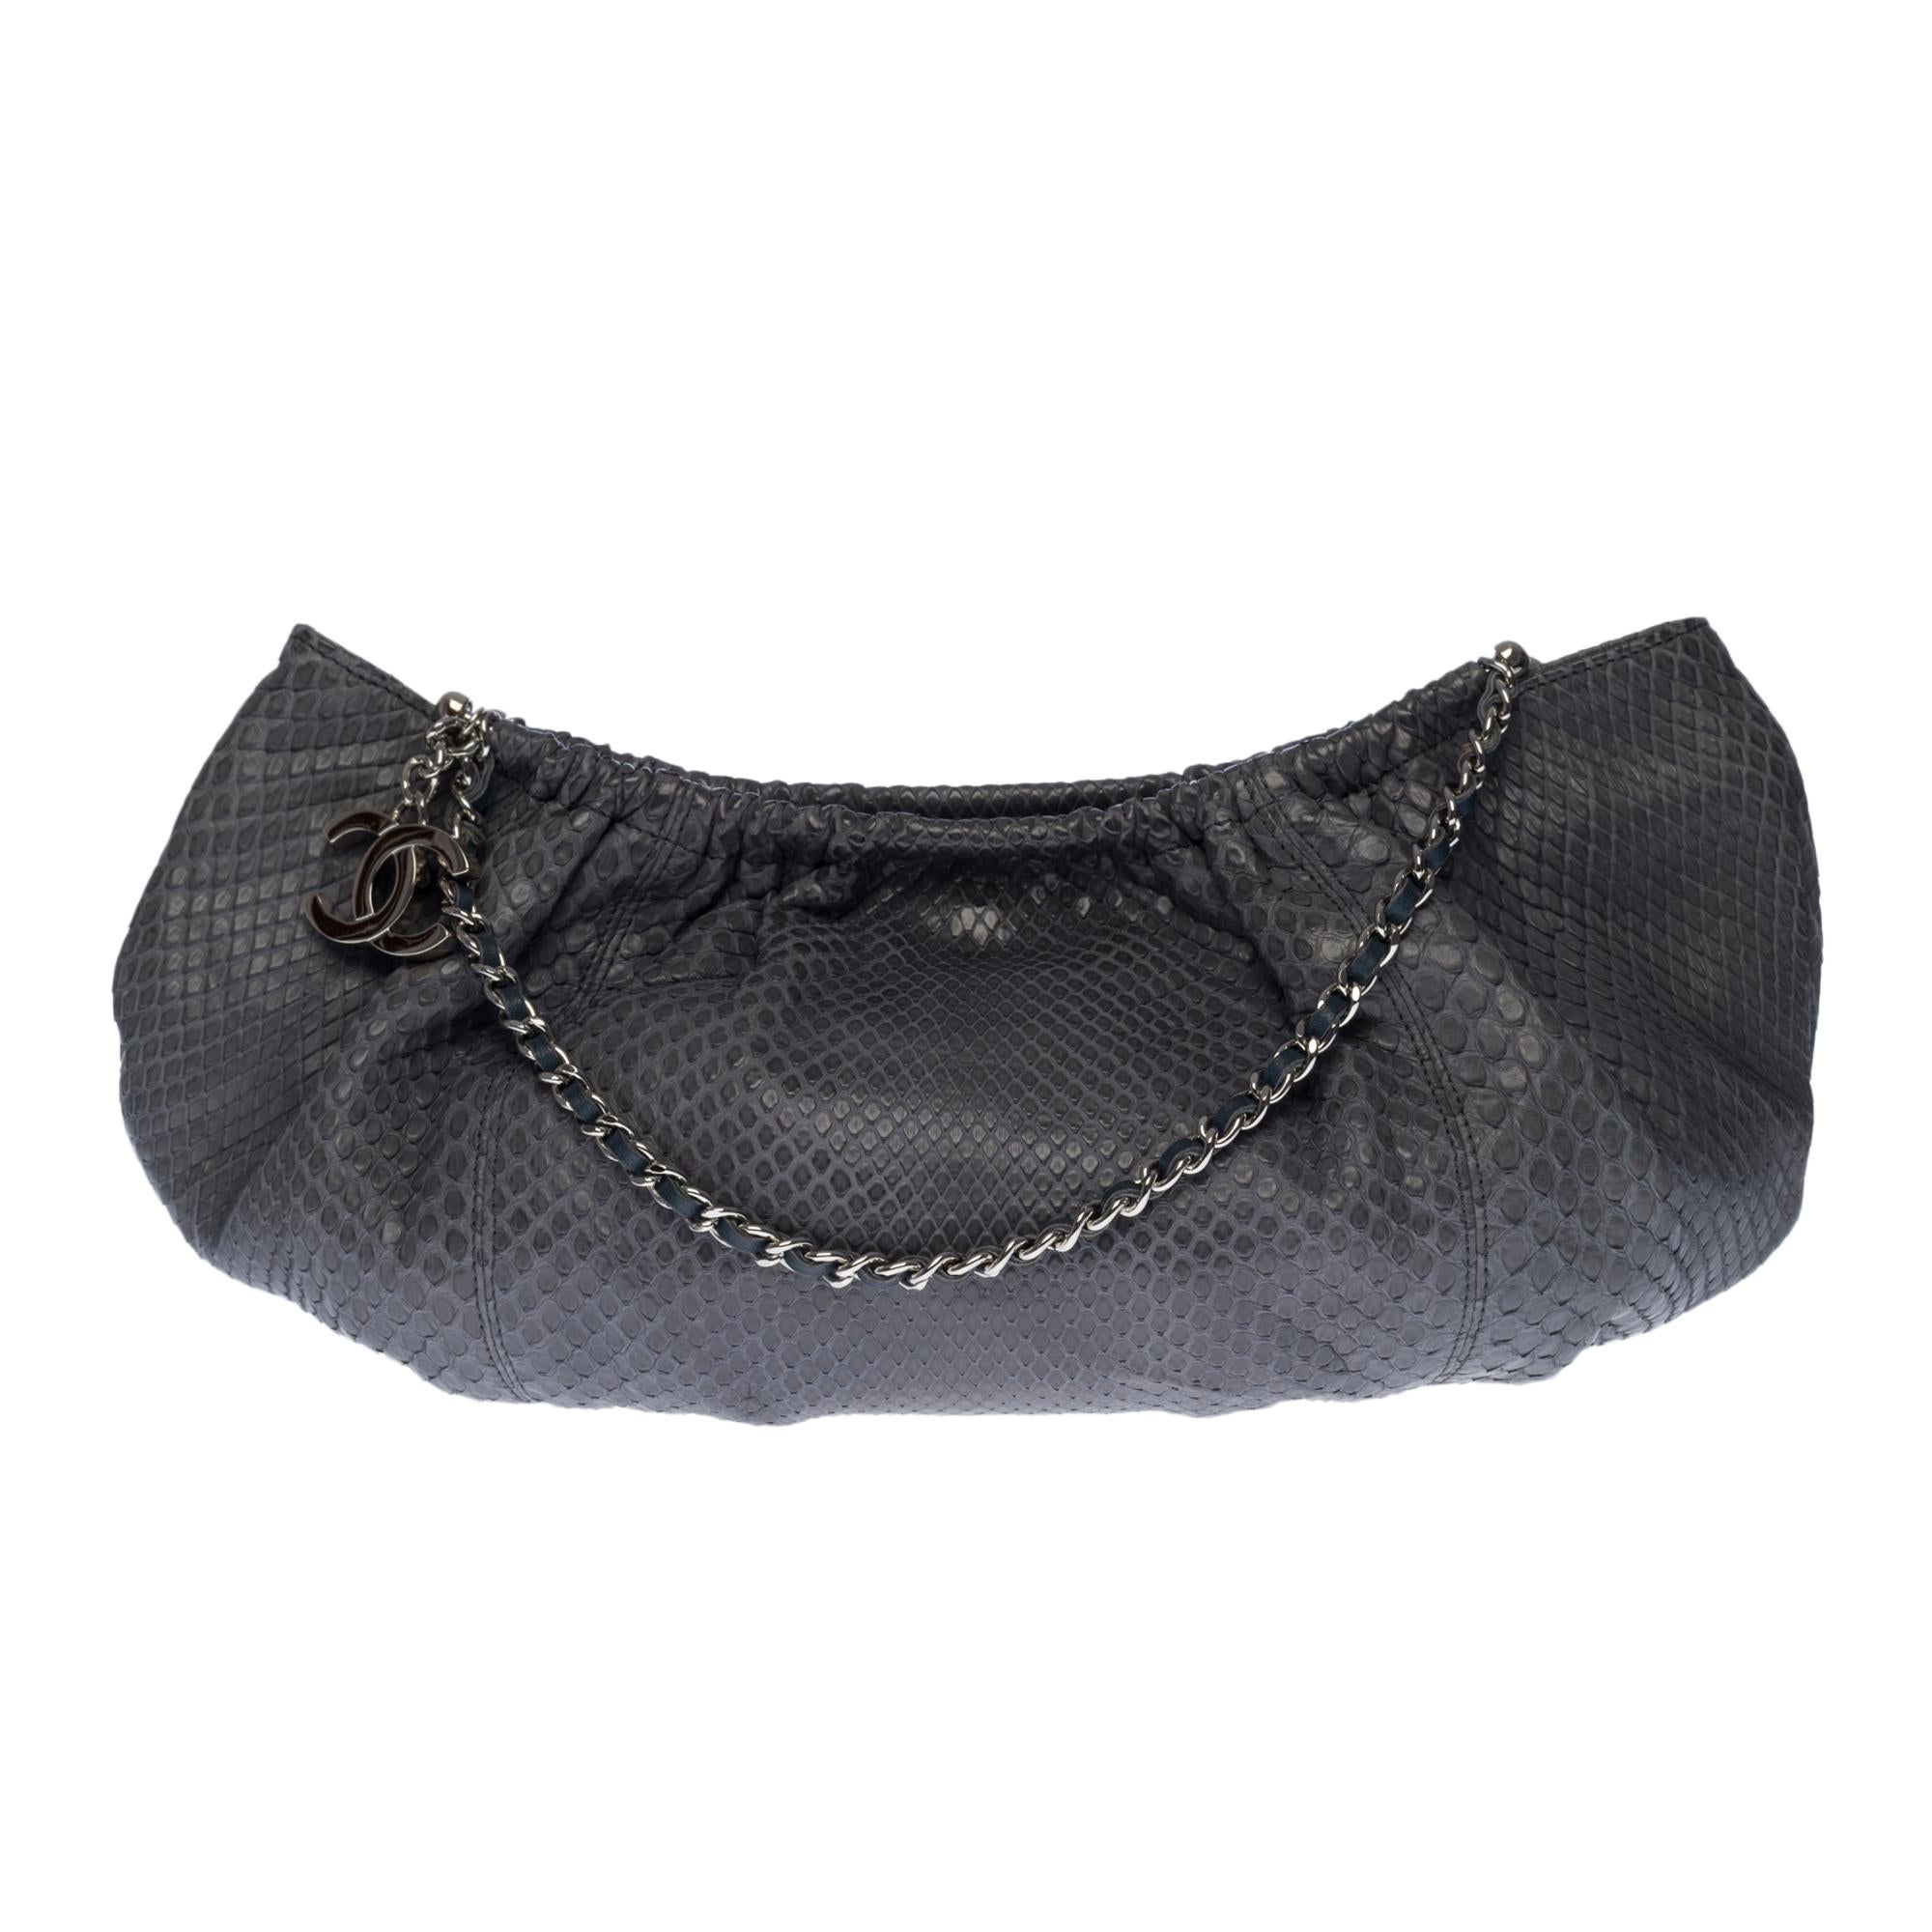 Lovely Chanel Classic shoulder bag in grey python, silver metal hardware, silver metal chain intertwined with grey leather for a hand or shoulder.
Top closure by press button.
Interior in gray monogram canvas.
Signature: 